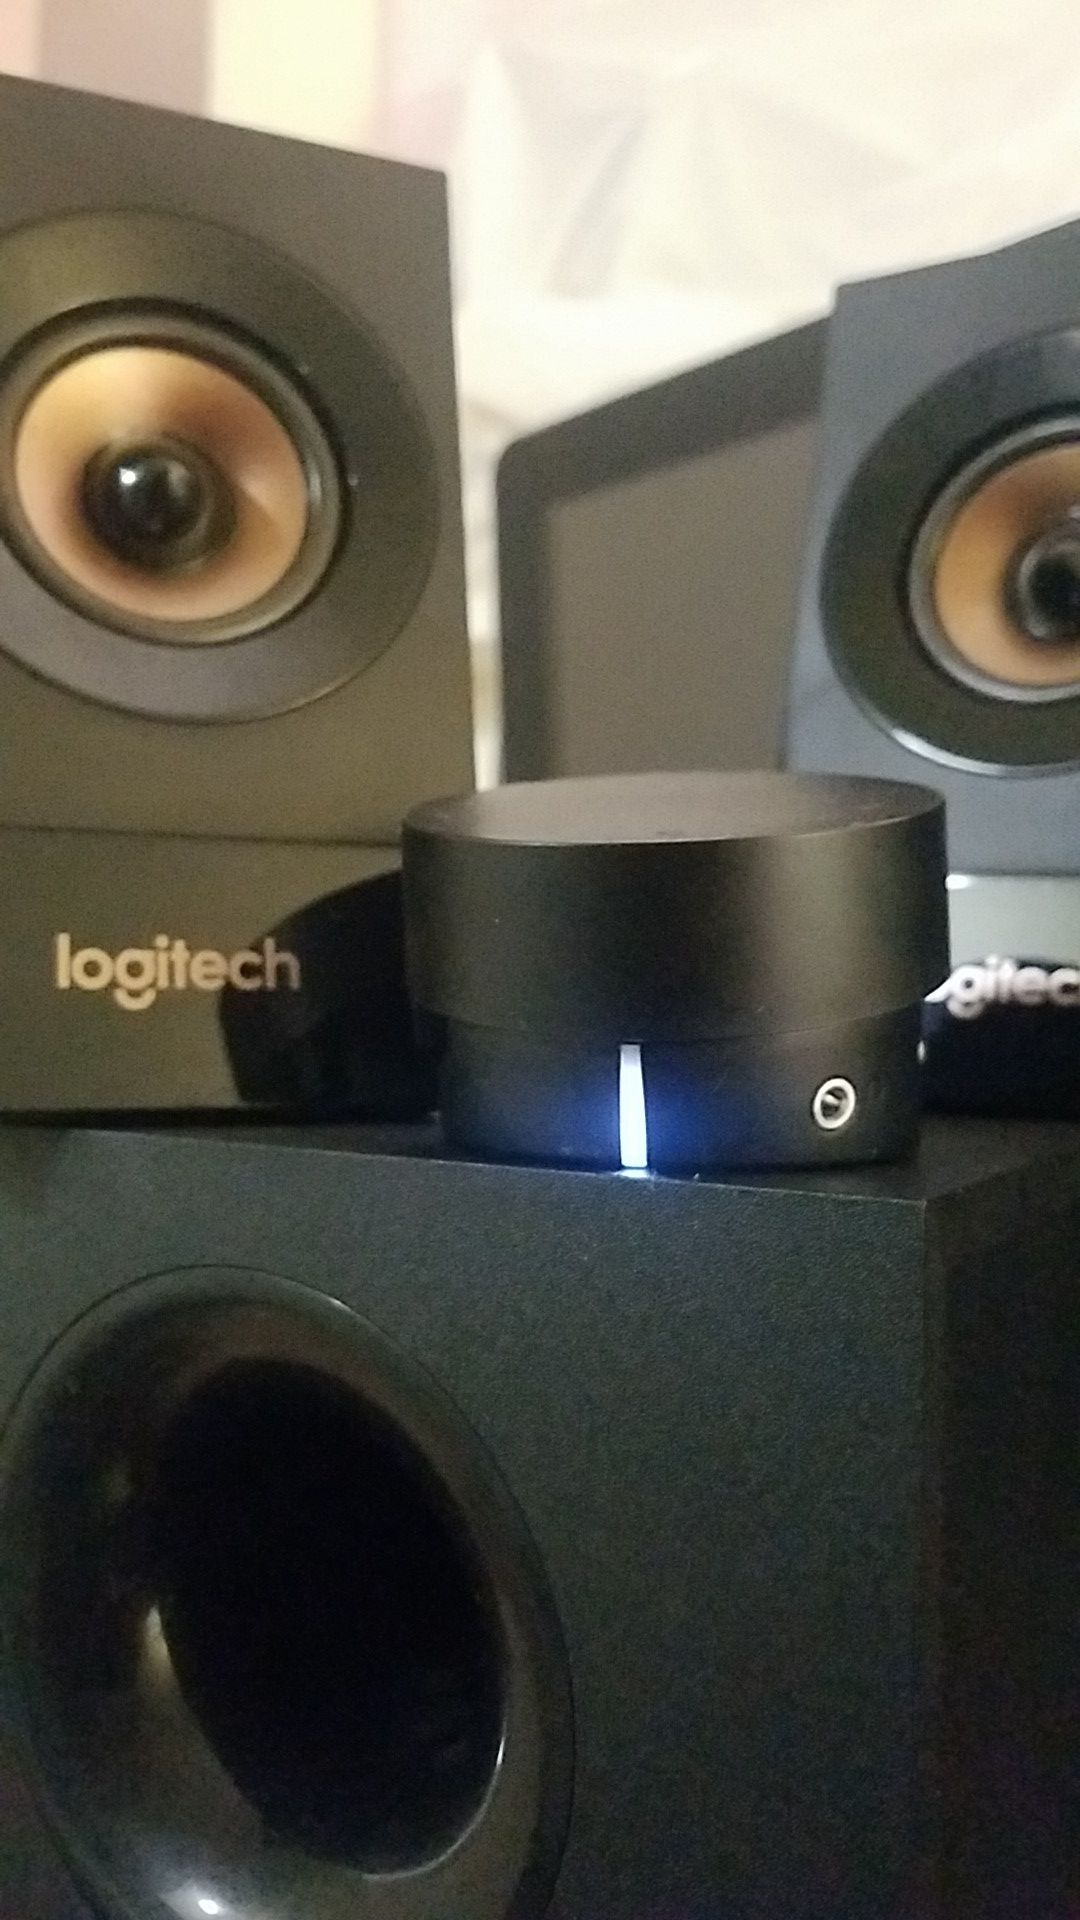 "LOGITECH " Quality Brand Name" when it comes to sound and quality and long lasting durability for electronics it dont get any better